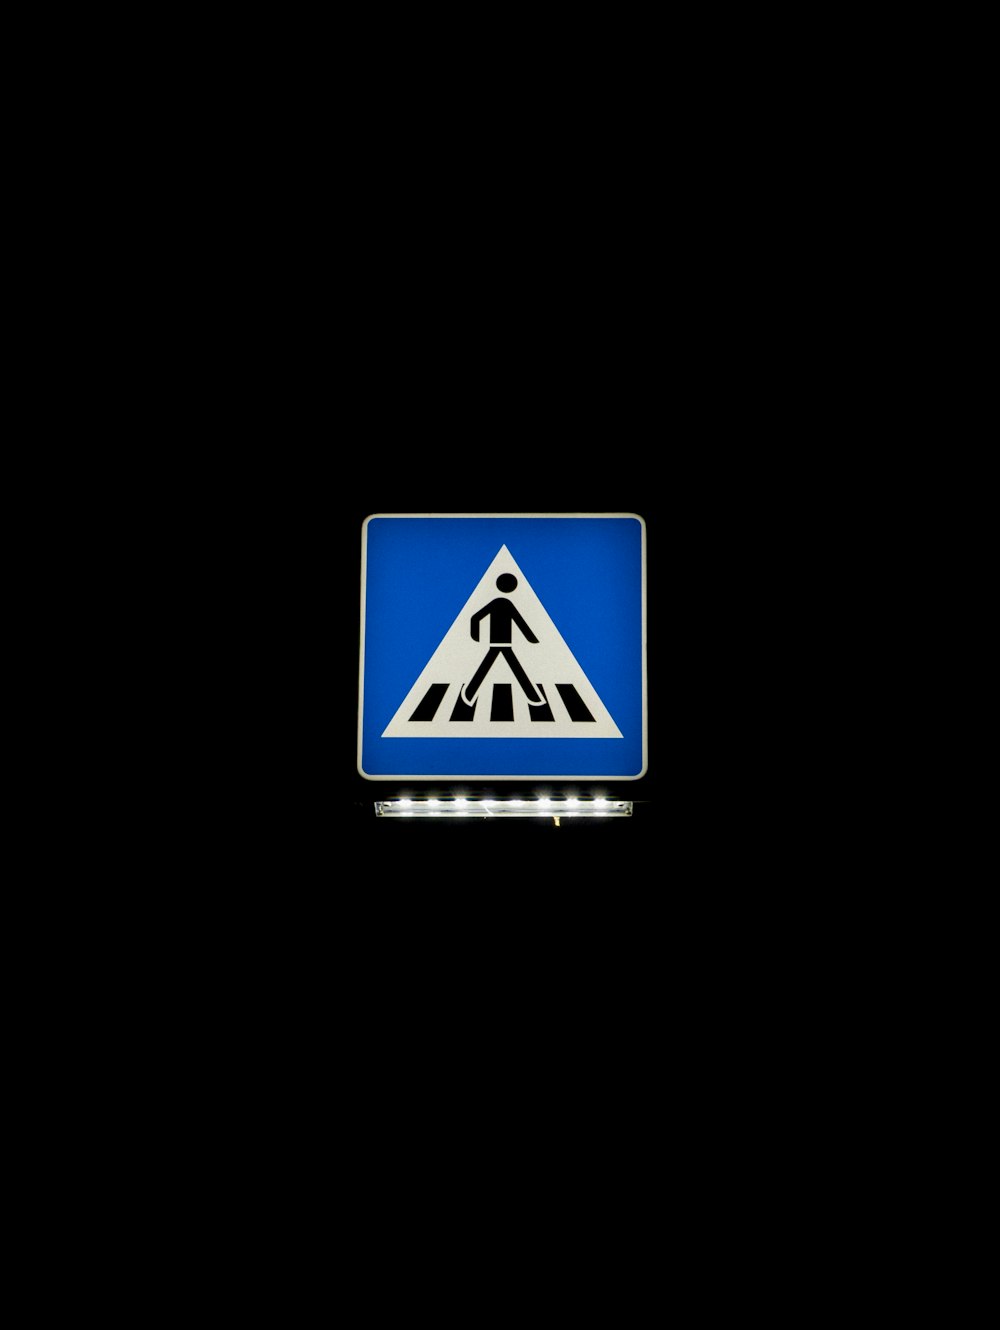 a blue pedestrian crossing sign on a black background